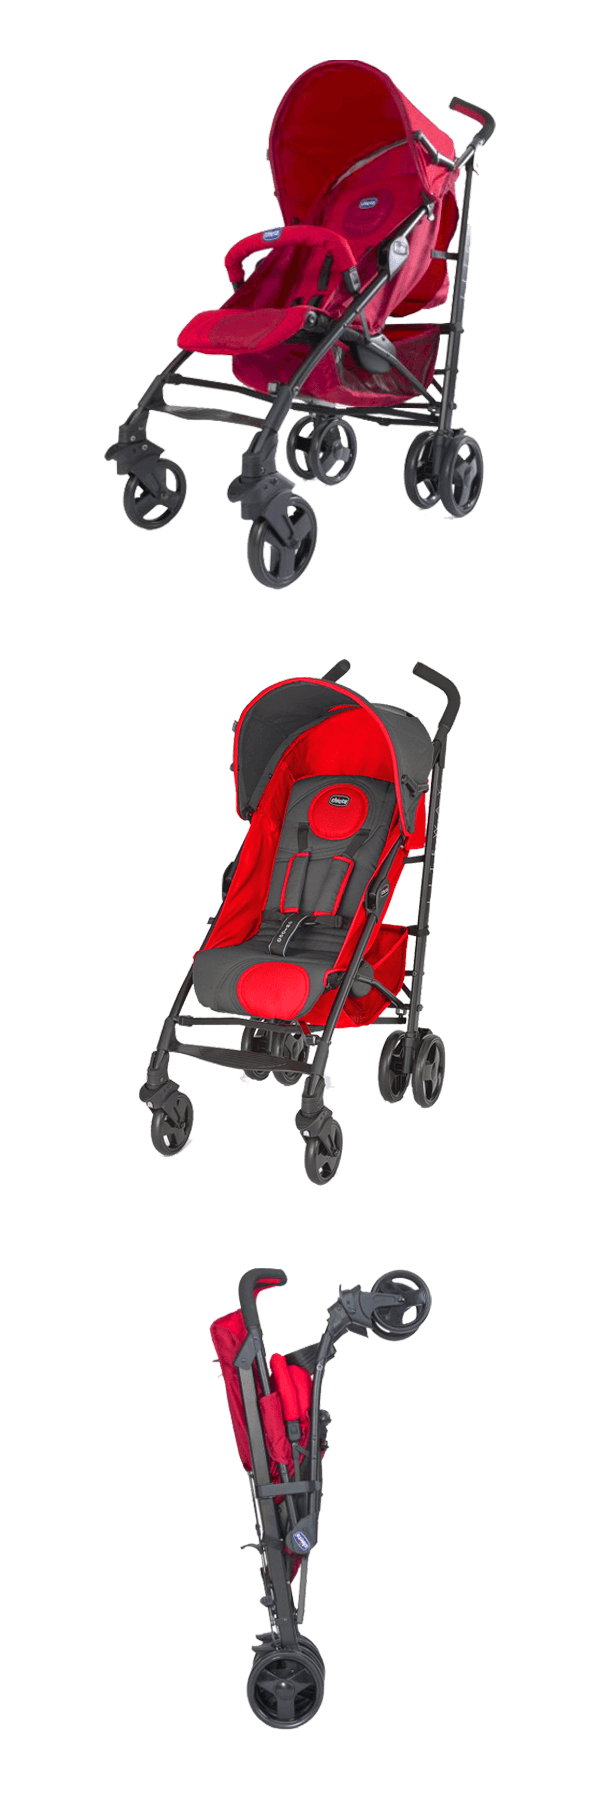 stroller configurations of Chicco Liteway